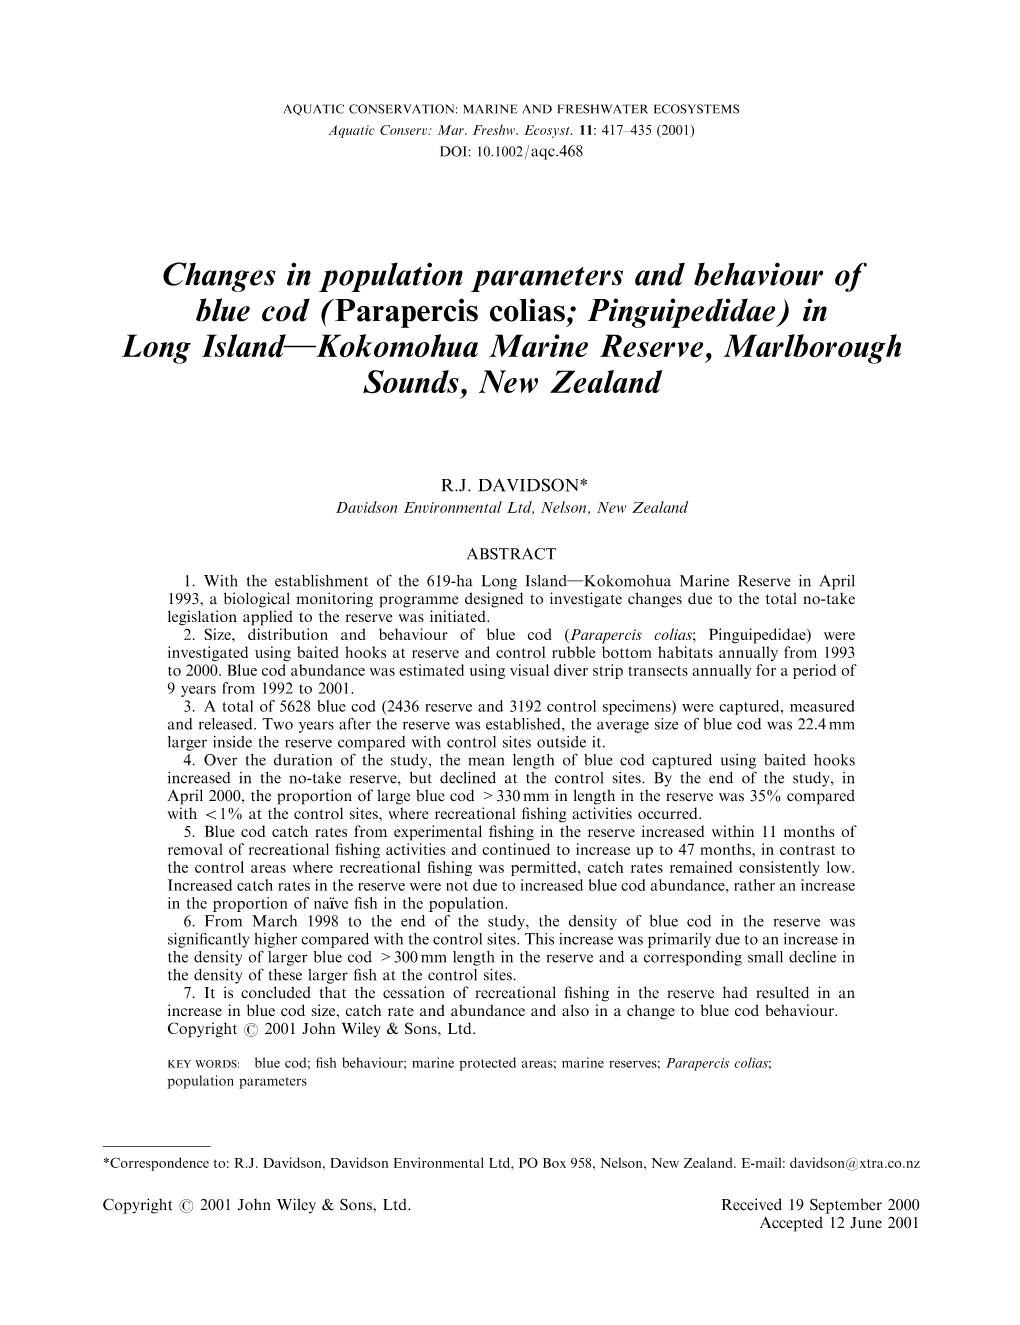 Changes in Population Parameters and Behaviour of Blue Cod (Parapercis Colias; Pinguipedidae) in Long Island}Kokomohua Marine Reserve, Marlborough Sounds, New Zealand